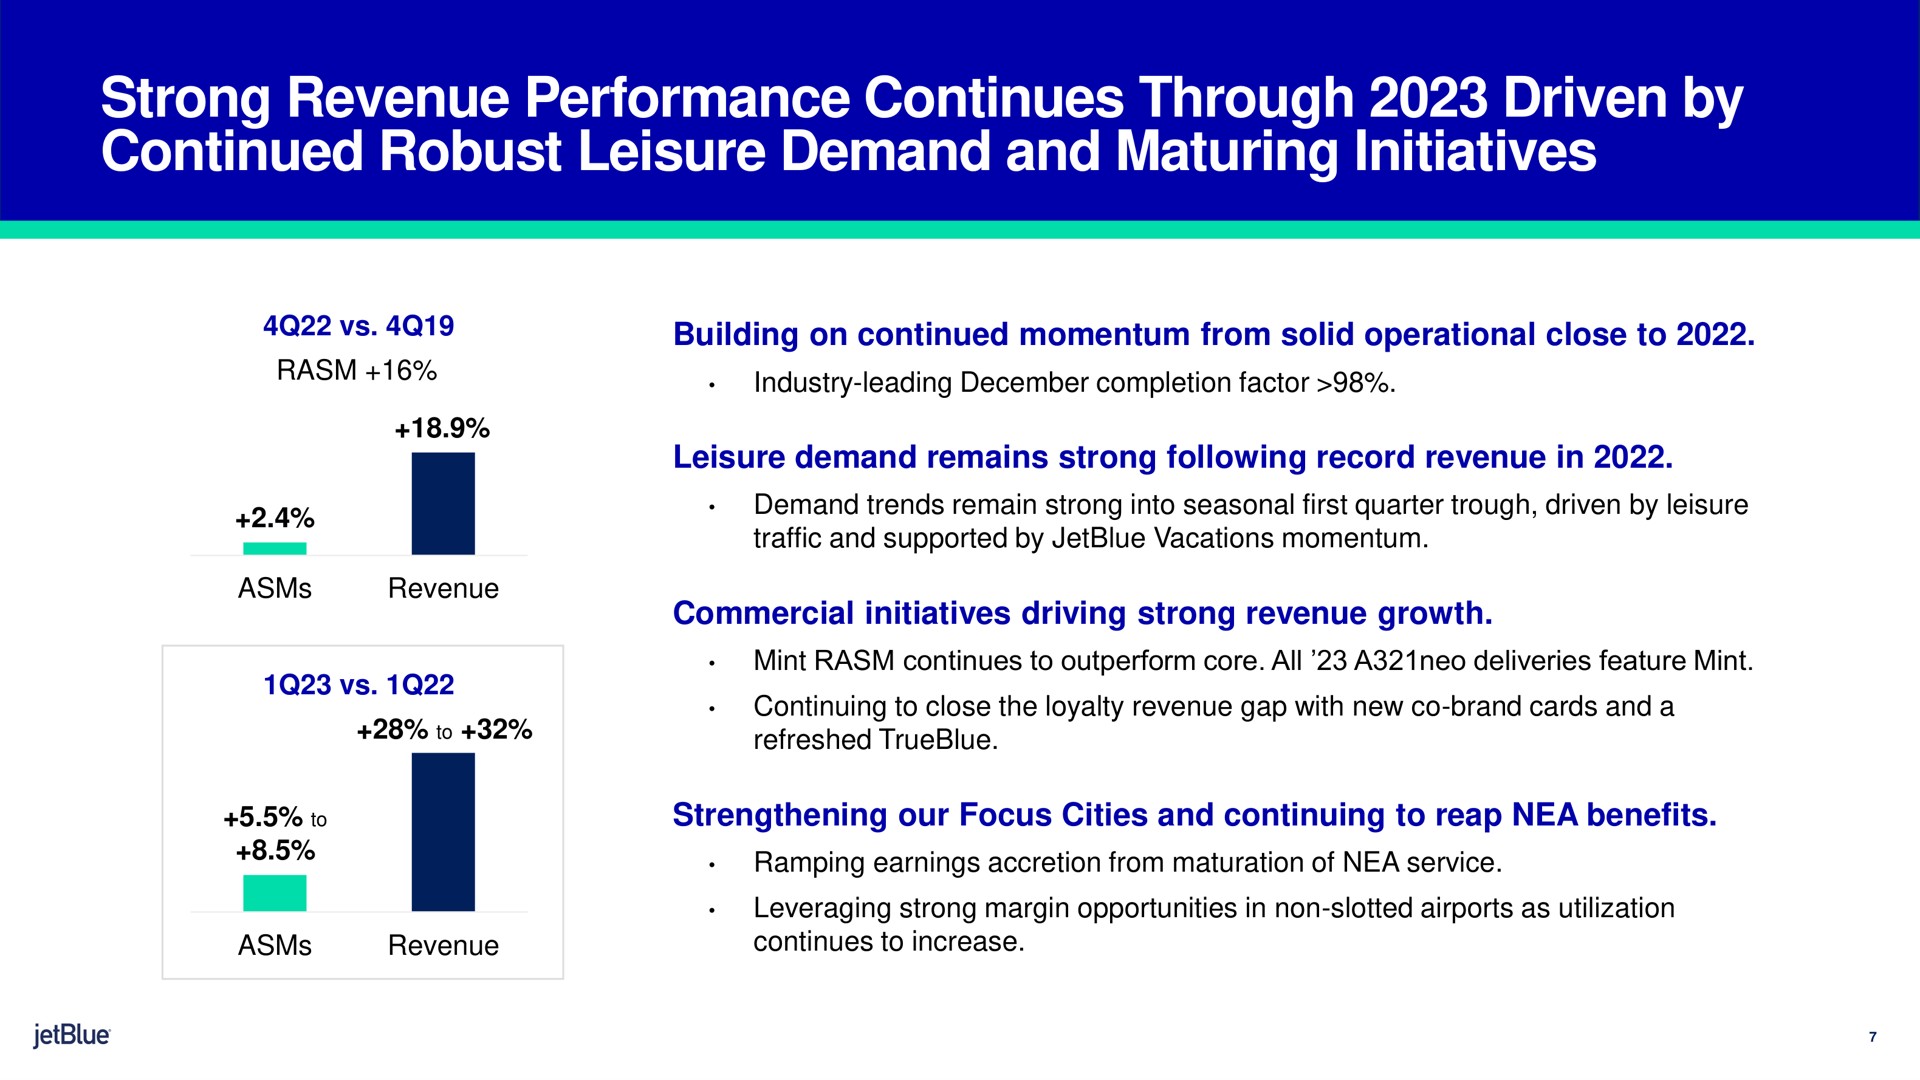 strong revenue performance continues through driven by continued robust leisure demand and maturing initiatives building on continued momentum from solid operational close to leisure demand remains strong following record revenue in commercial initiatives driving strong revenue growth strengthening our focus cities and continuing to reap nea benefits | jetBlue